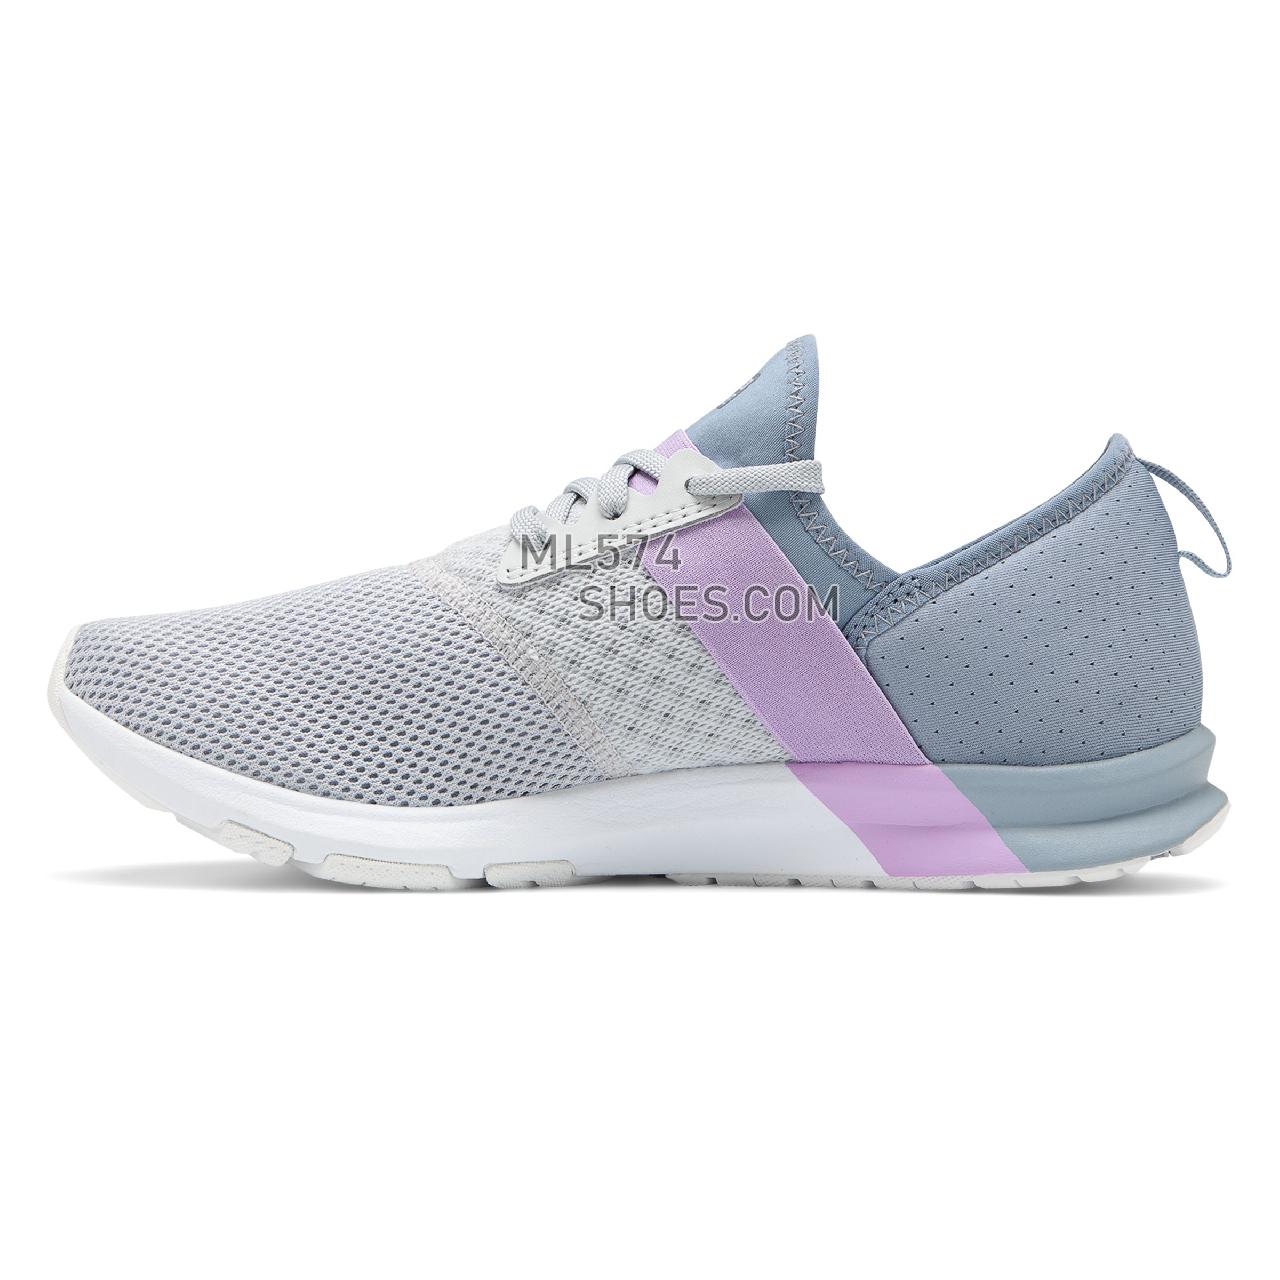 New Balance FuelCore NERGIZE - Women's Whats Trending - Light Aluminium with Reflection and Dark Violet Glo - WXNRGNG